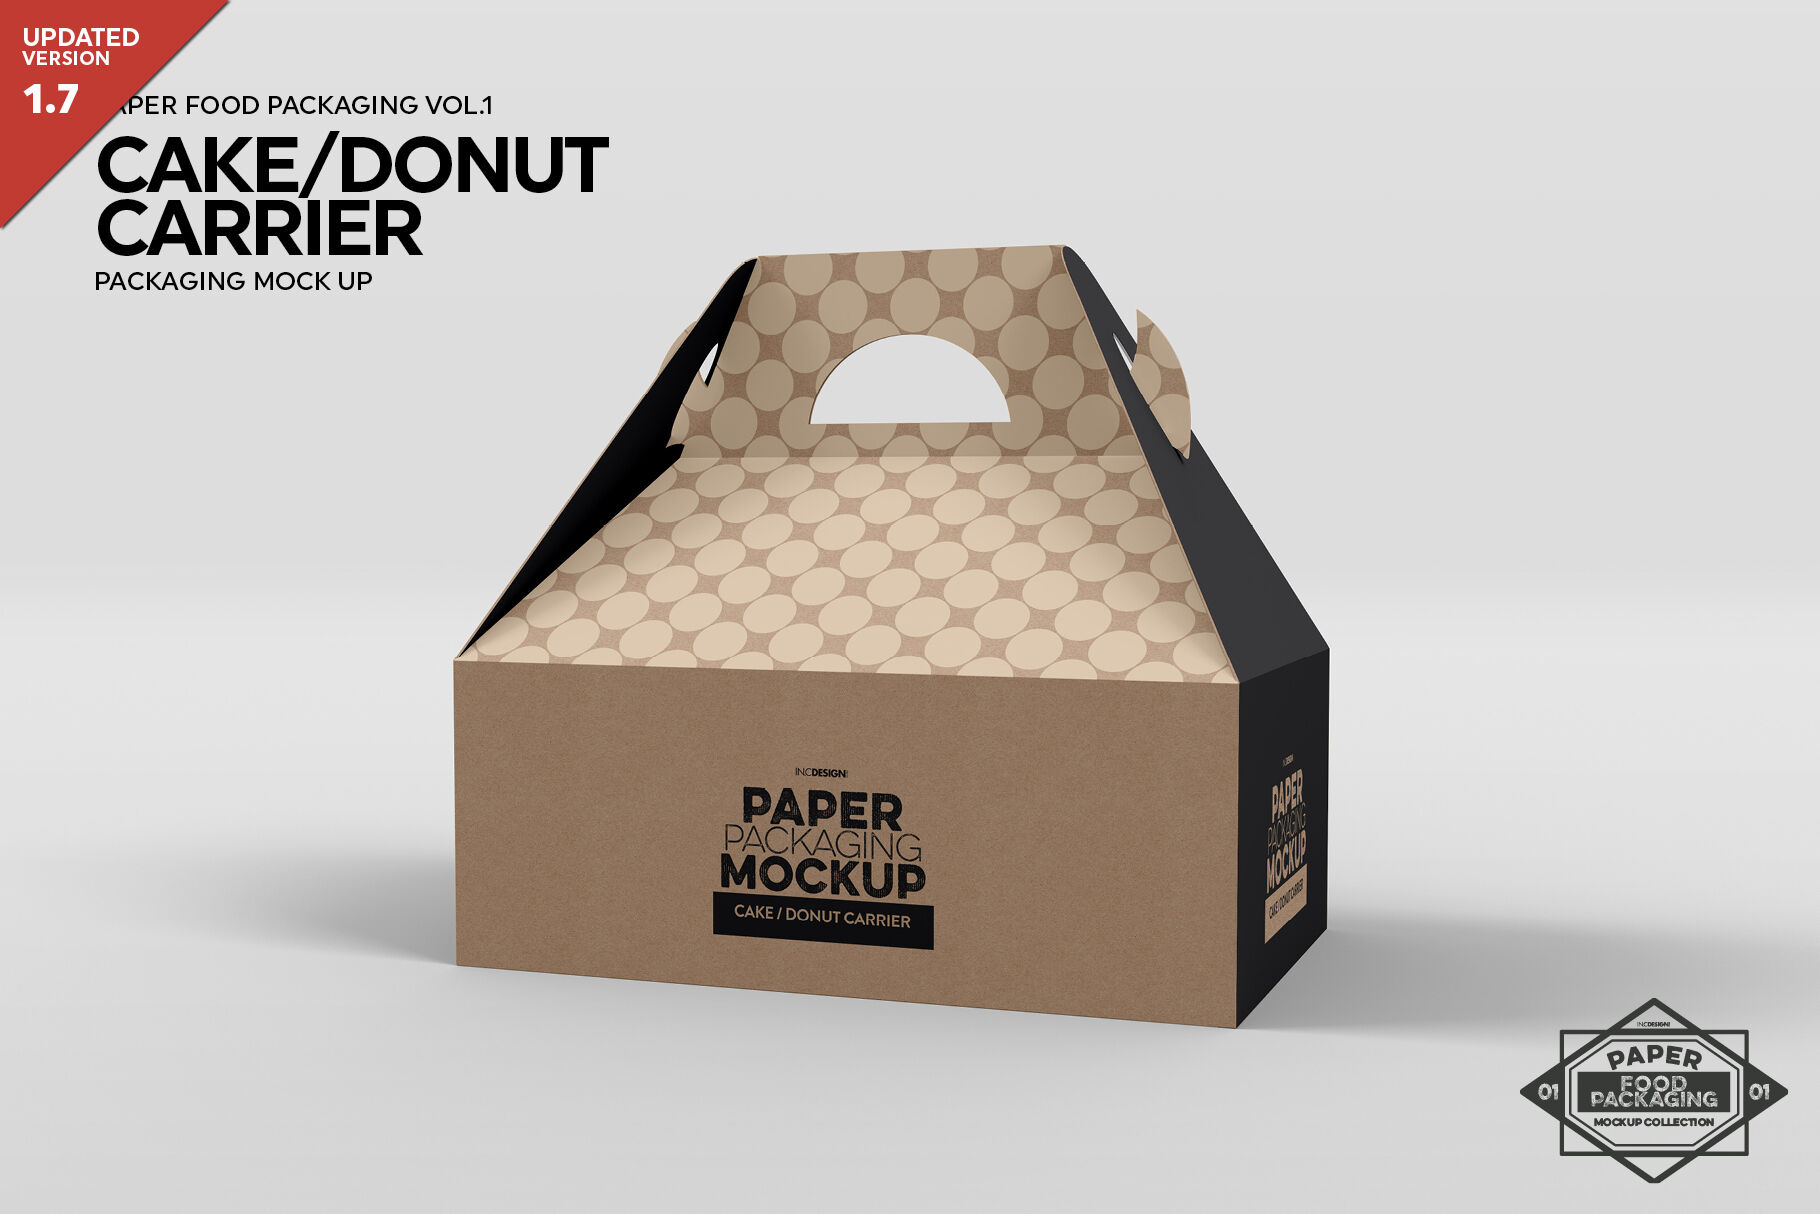 Download Cake Carrier Packaging MockUp By INC Design Studio | TheHungryJPEG.com